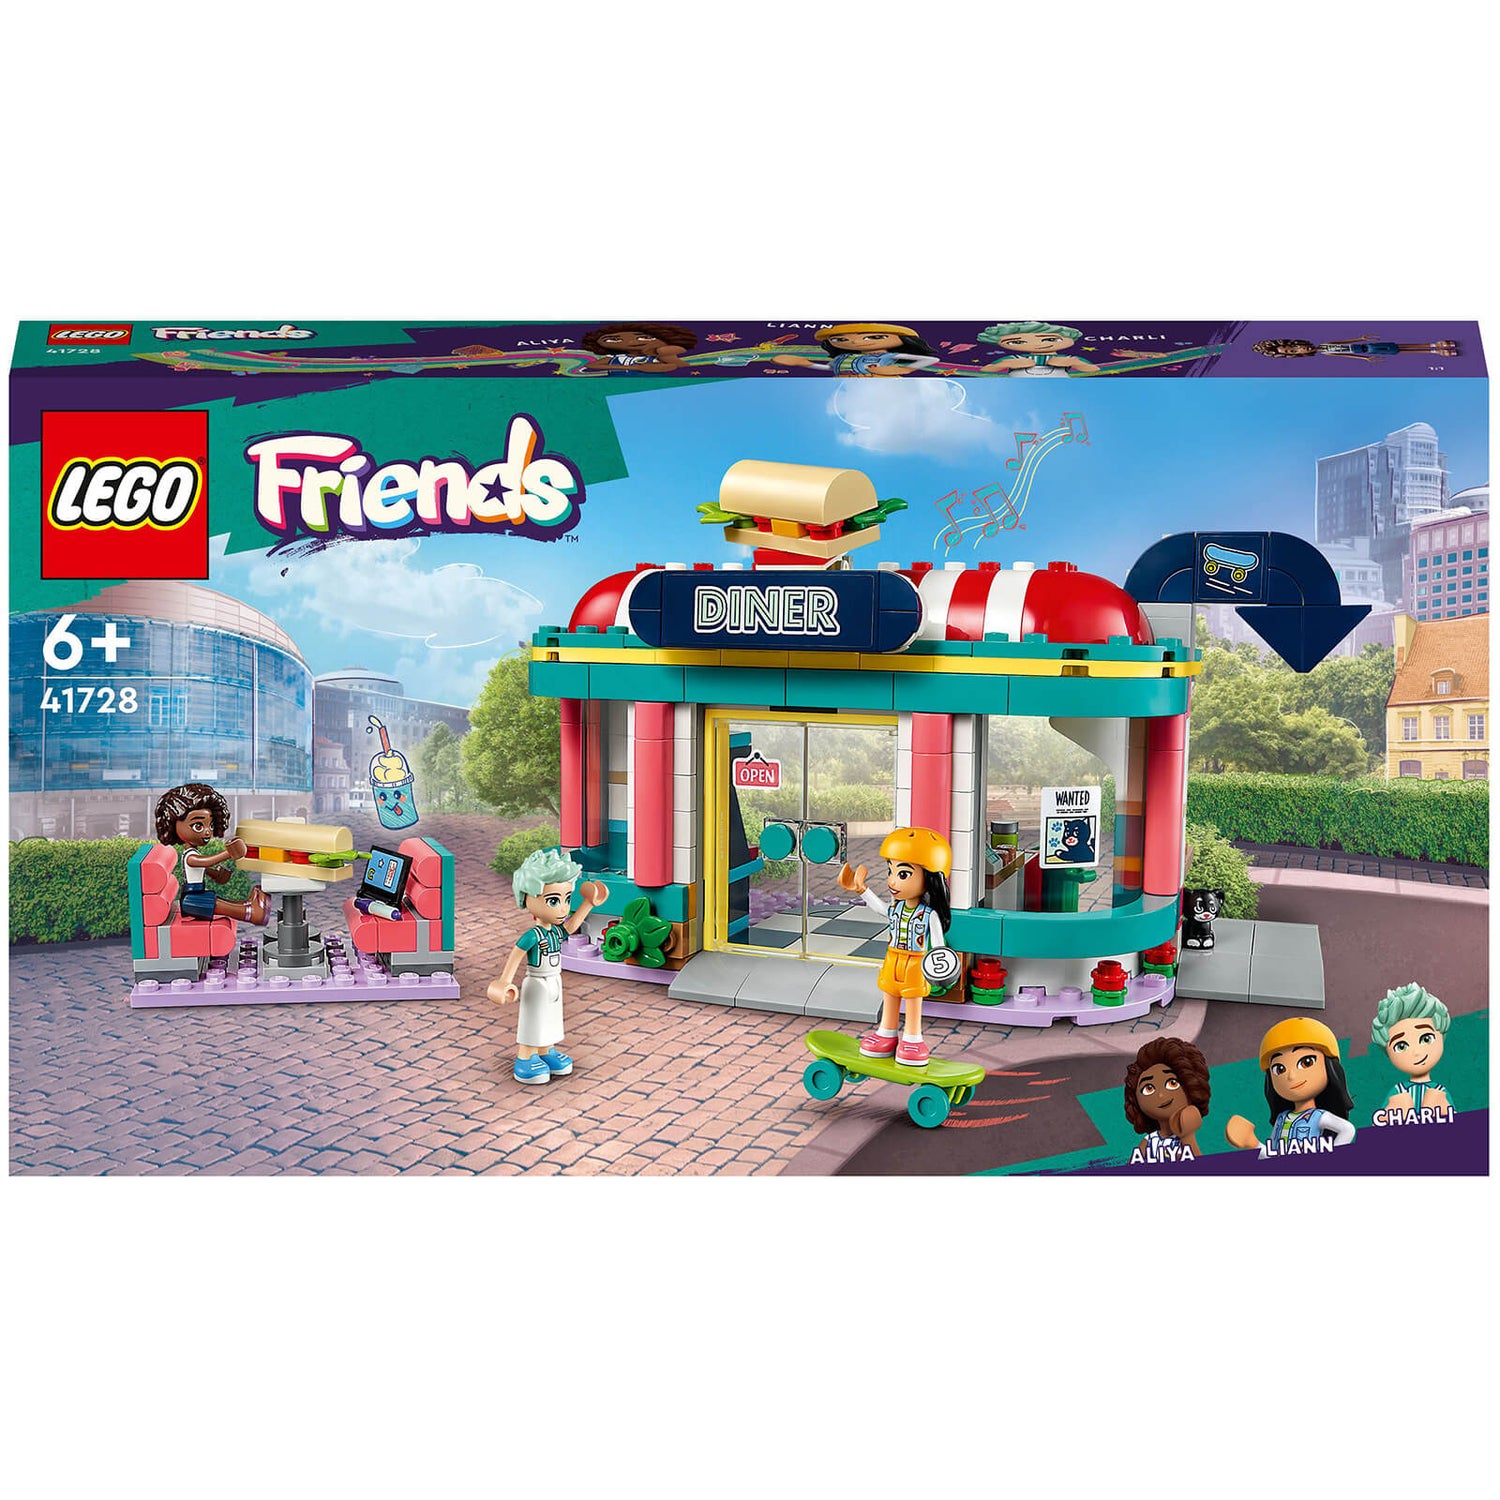 Heartlake Downtown Diner 41728 | Friends | Buy online at the Official LEGO®  Shop US